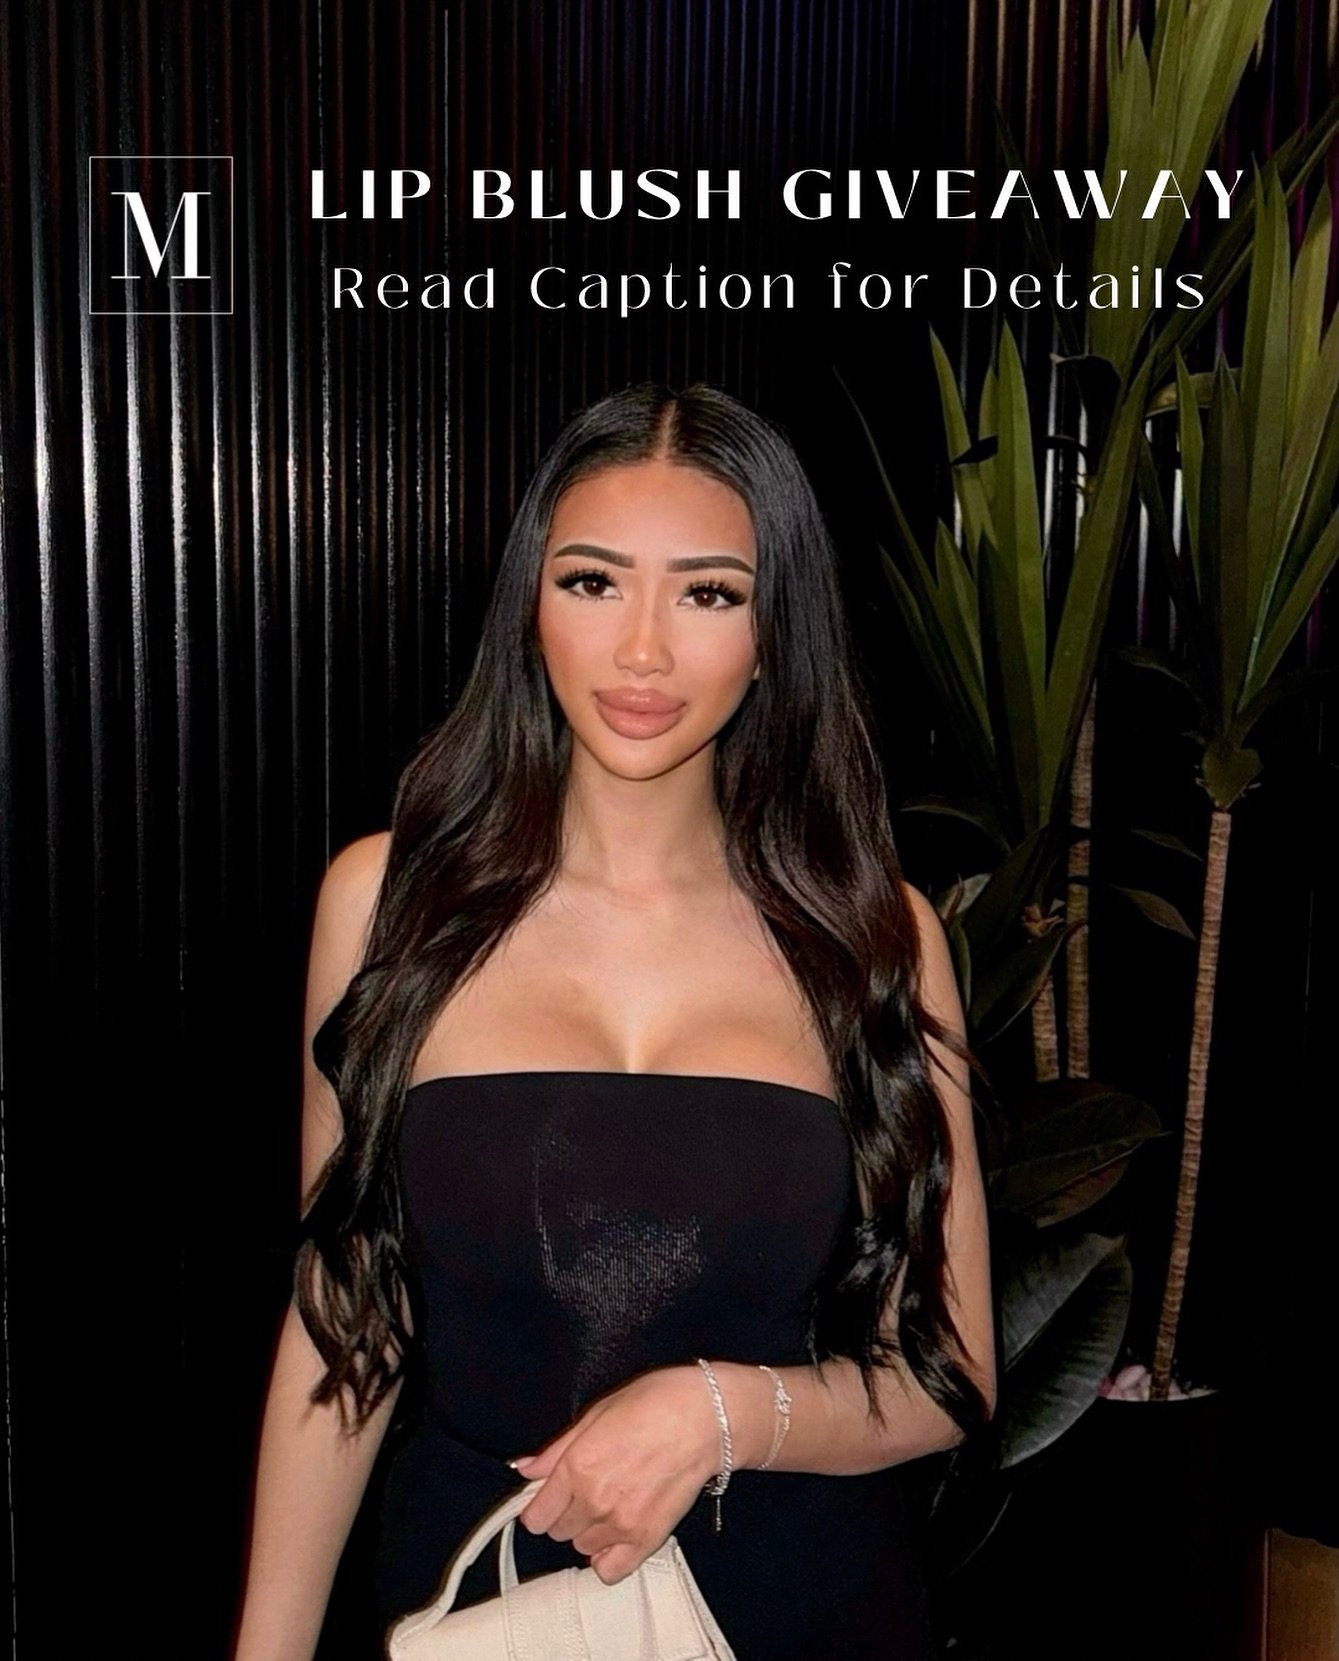 THE LIP BLUSH GIVEAWAY 😘😘

Lip blushing is a popular, semi-permanent makeup treatment we all cannot seem to get off our lips (even literally). Just like others like microblading, eyeliner tattoo, etc., here is another way to wake up feeling chic wi